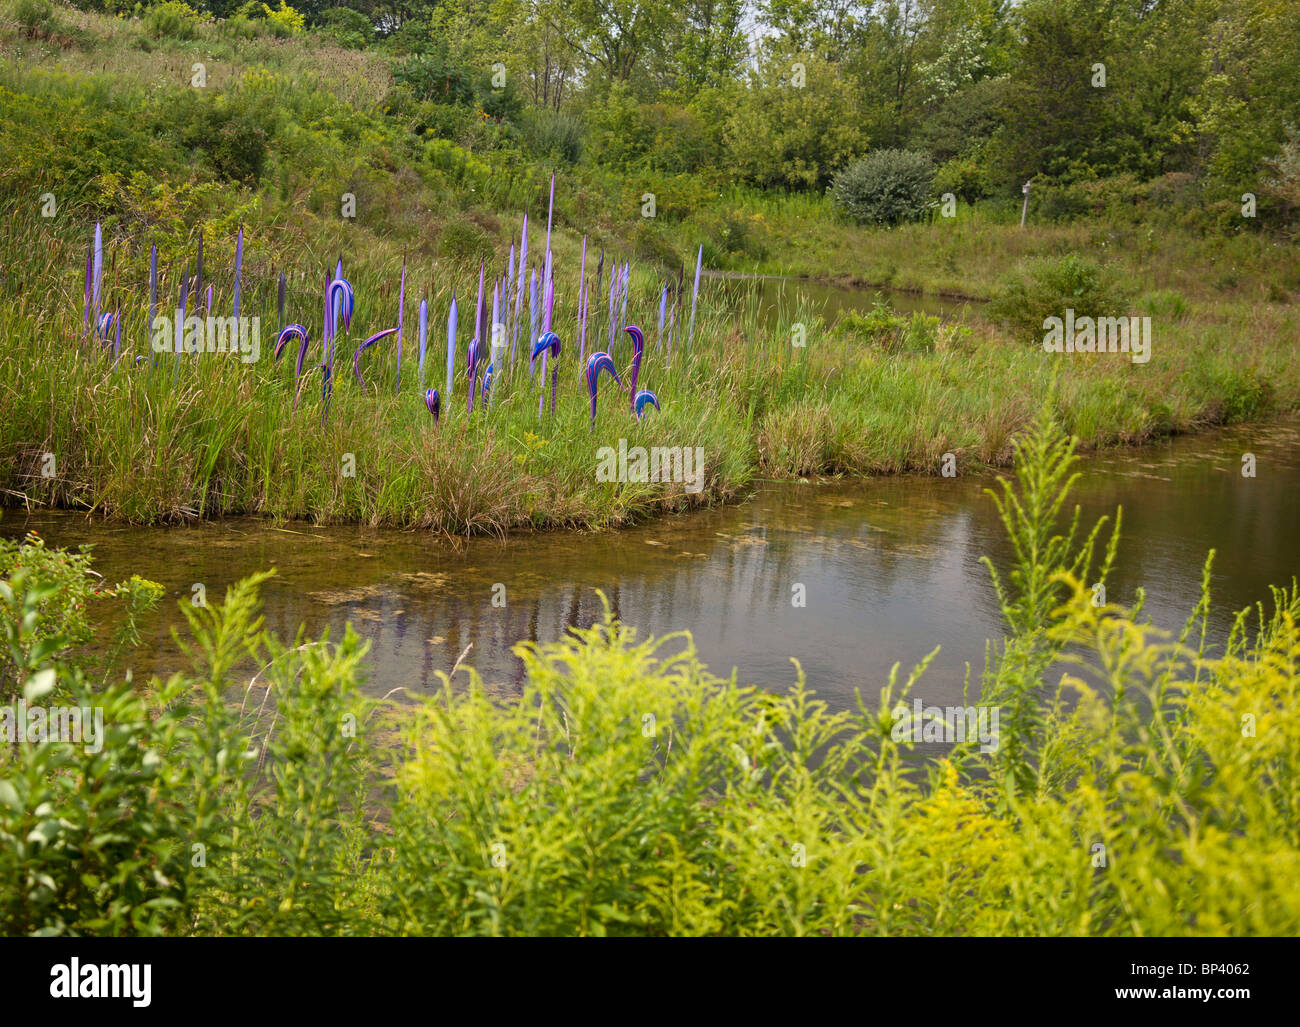 Dale Chihuly's Neodymium Reeds and Herons glass sculpture on display at the Frederik Meijer Gardens and Sculpture Park Stock Photo